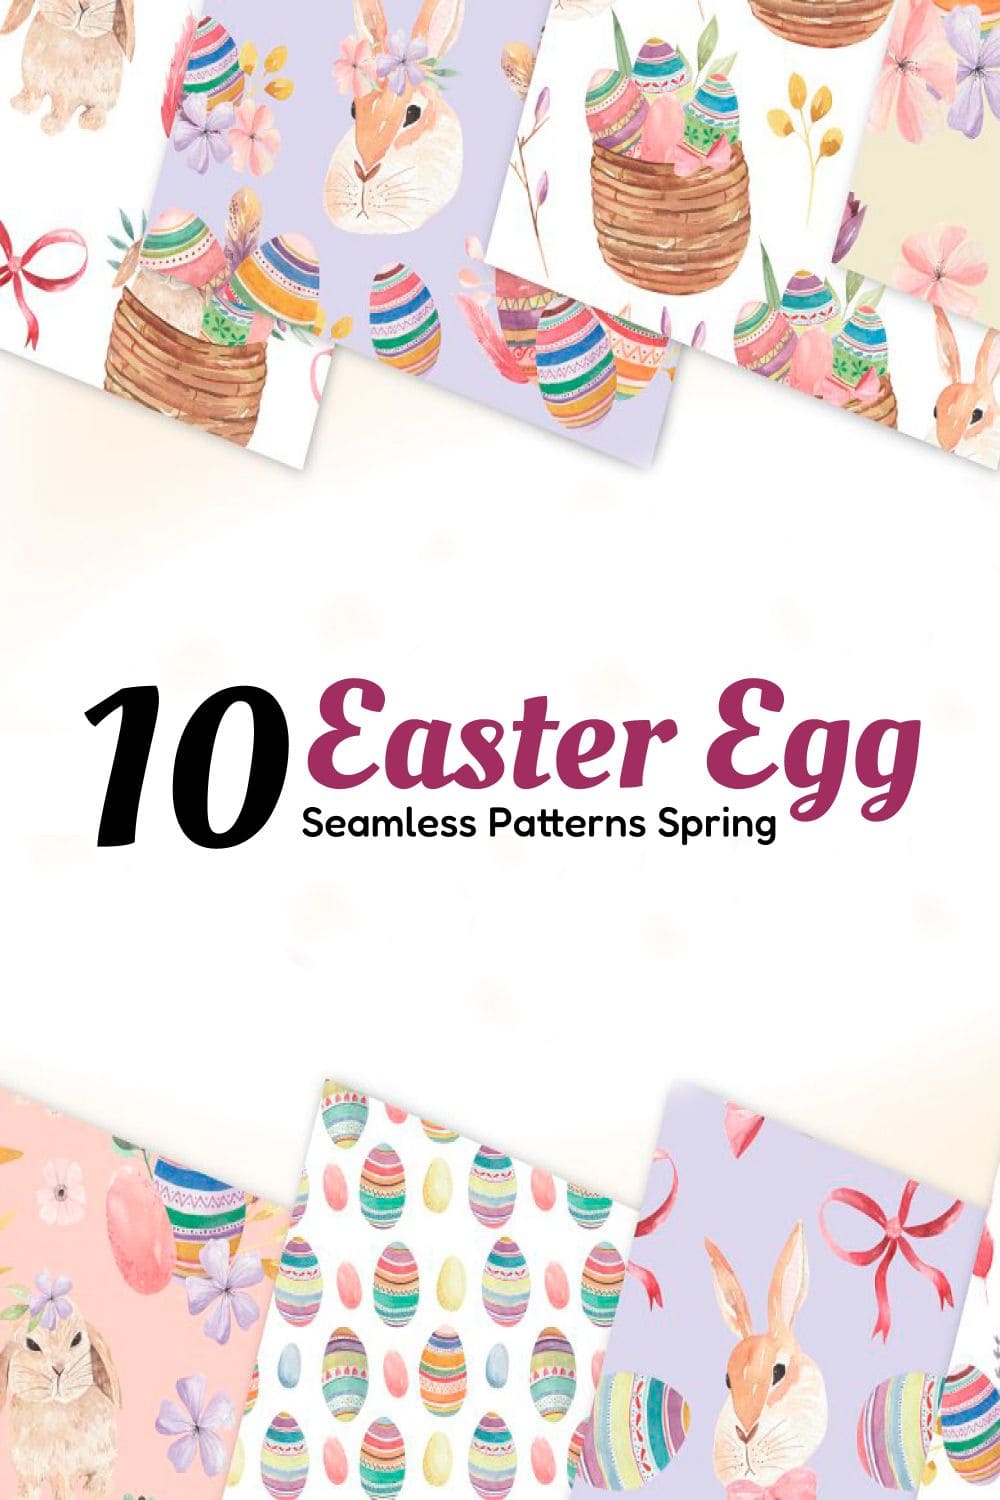 Colored painted eggs and an Easter bunny are drawn on purple, pink, and white backgrounds.